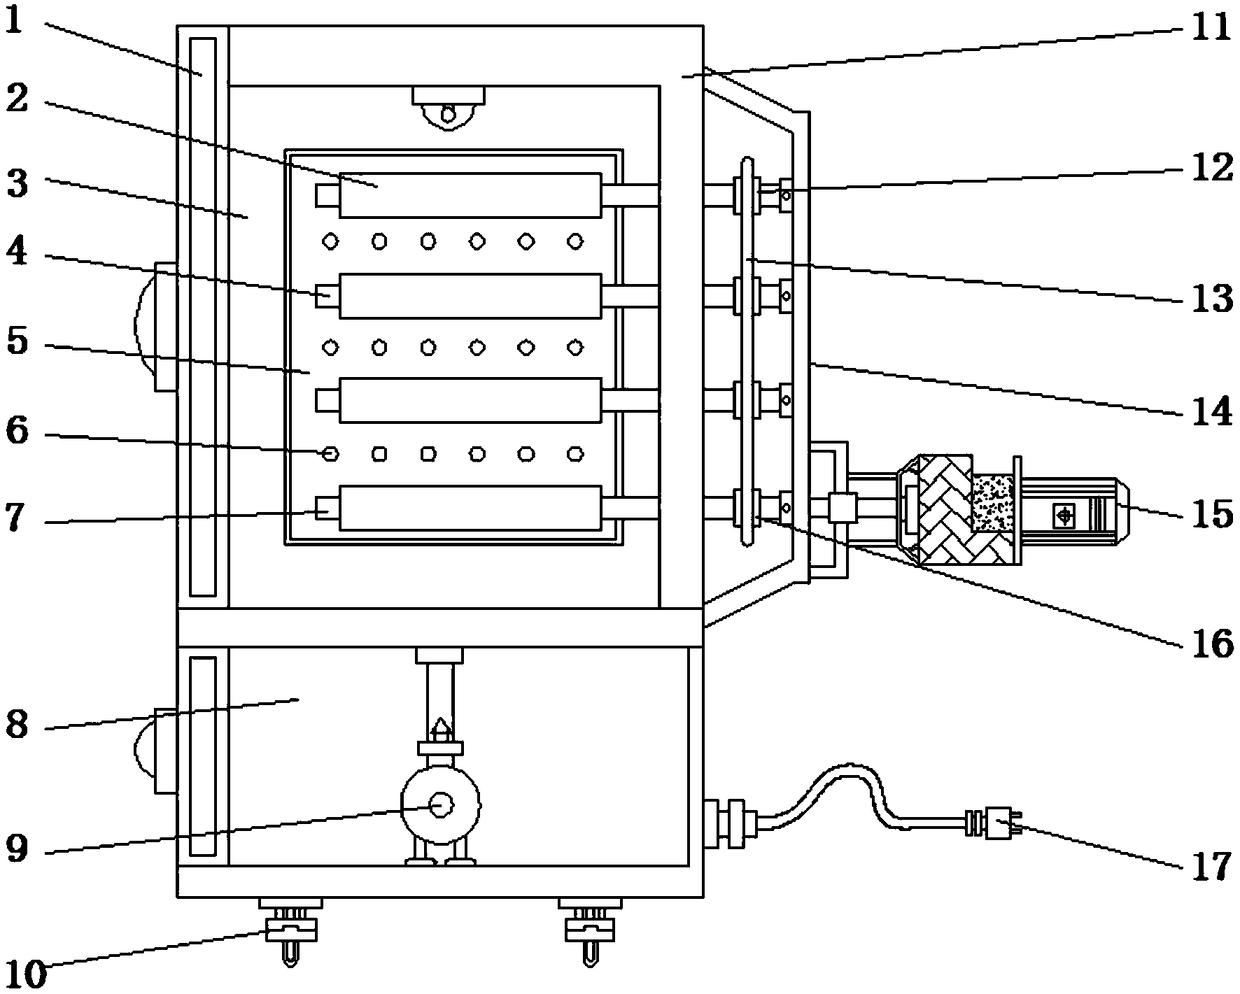 Steam fixing apparatus used for processing socks